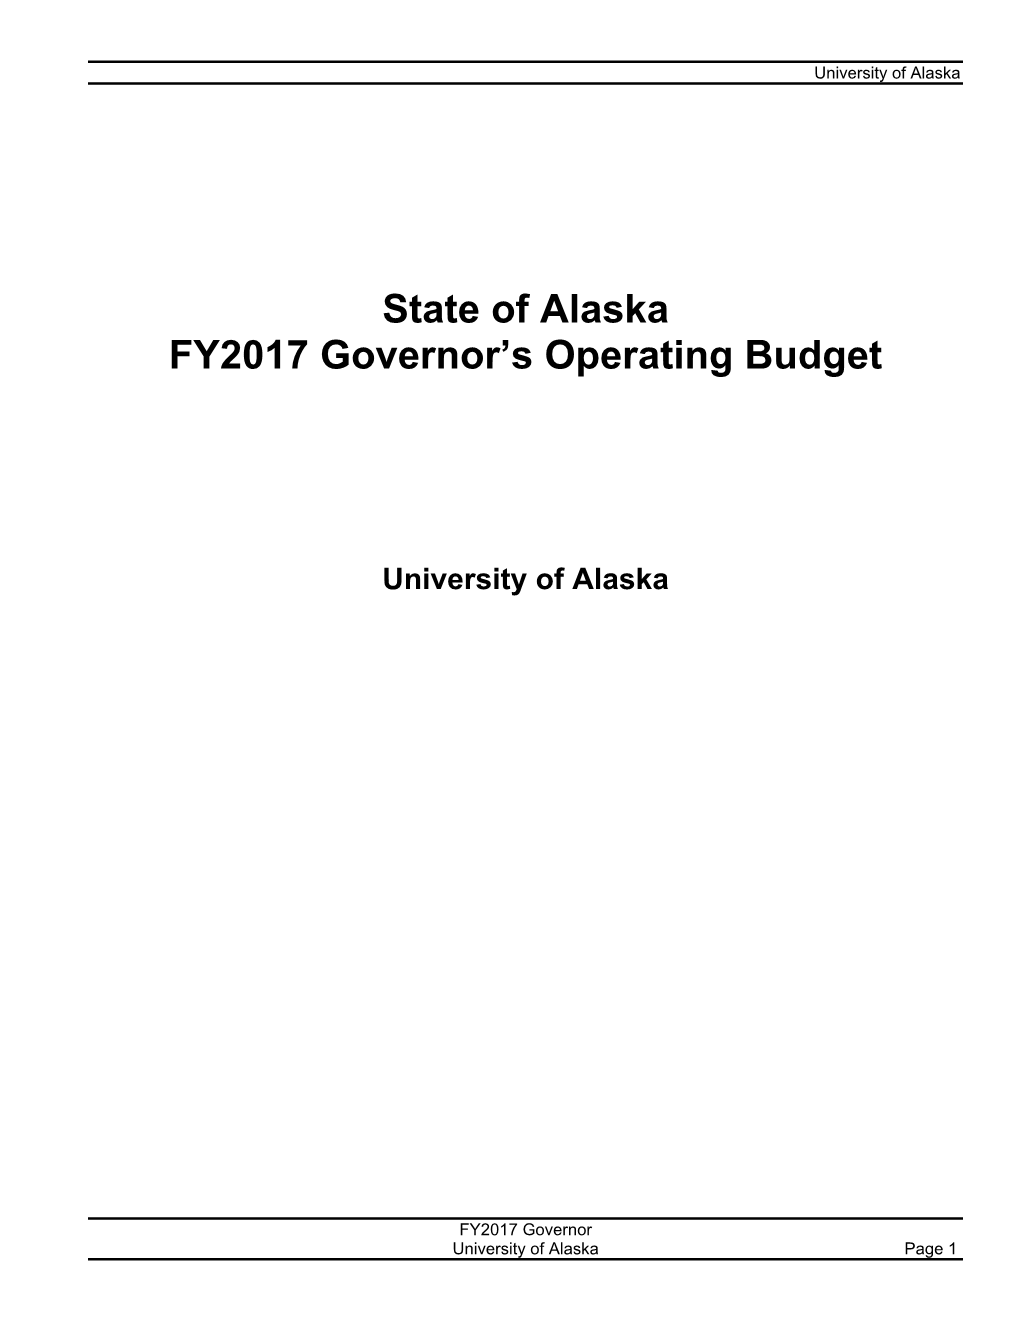 FY17 Governor's Proposed Operating and Capital Budget